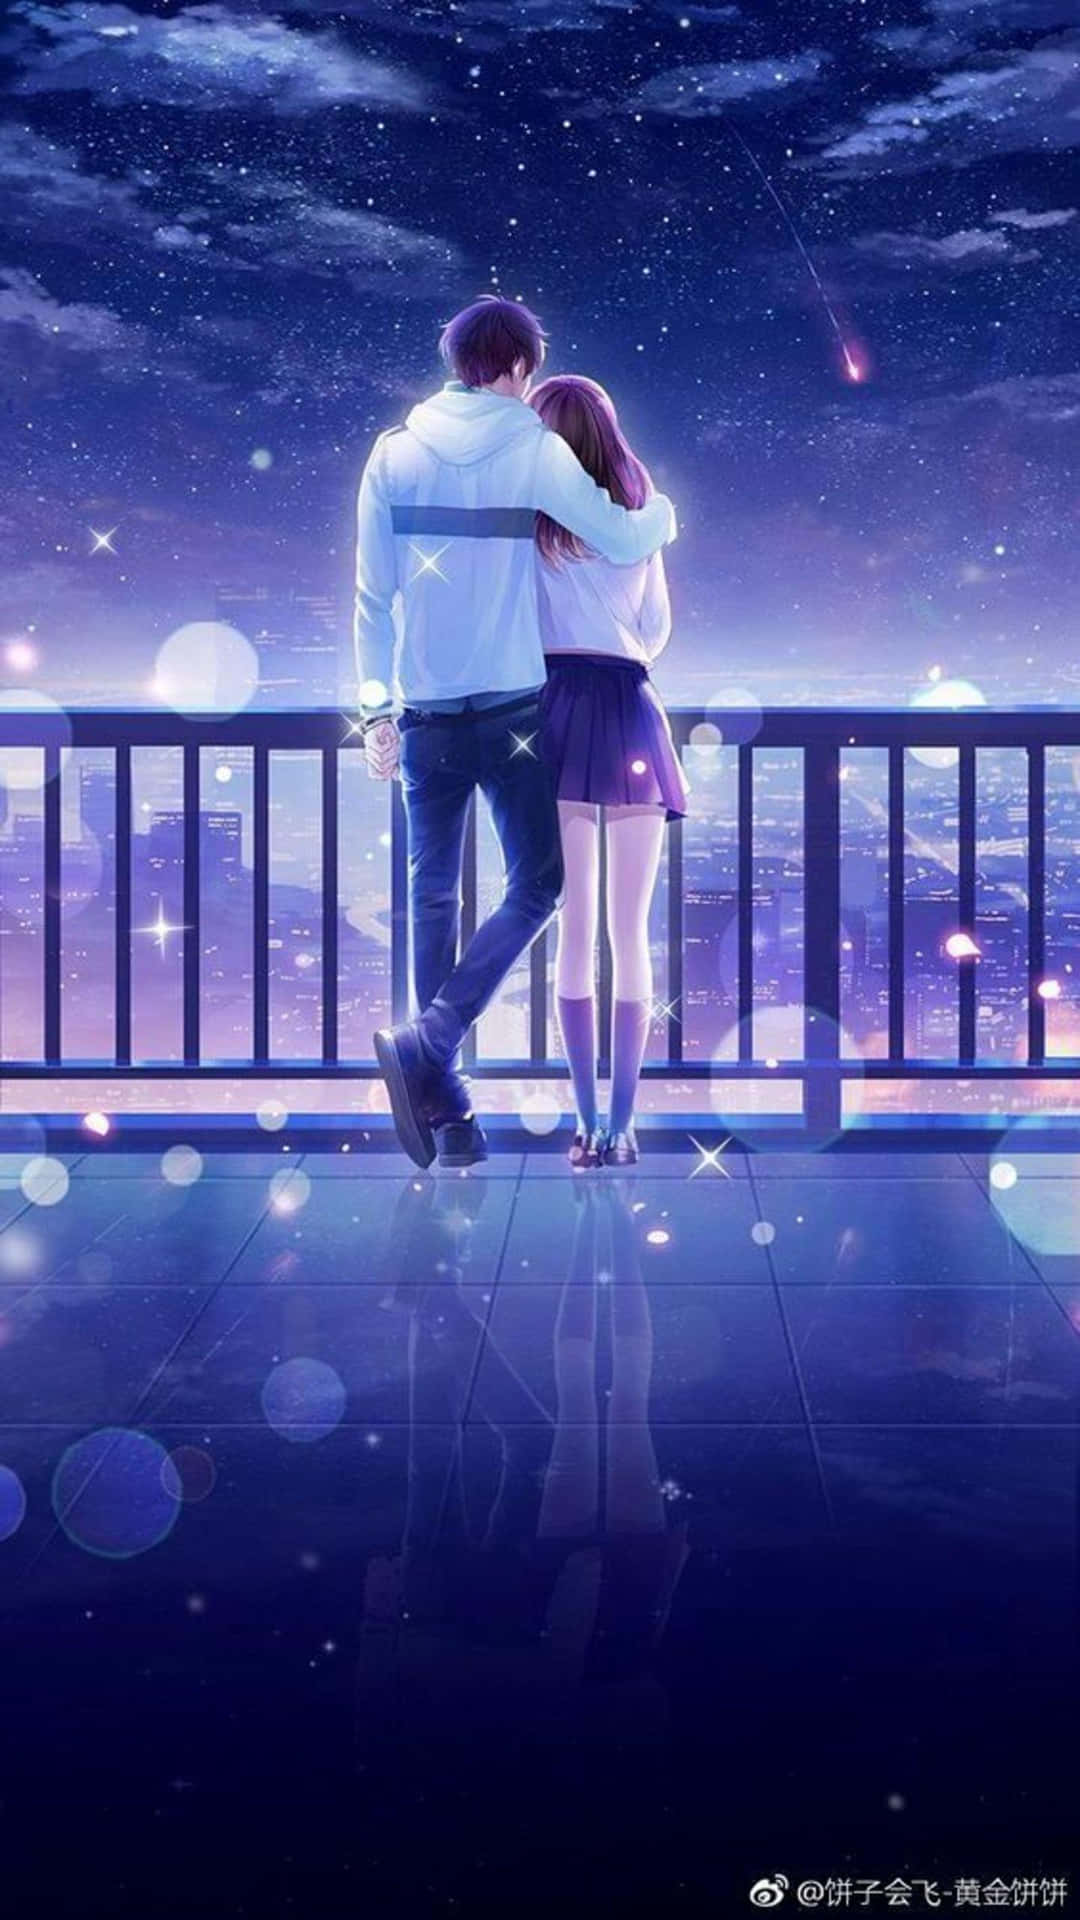 A Couple Standing On A Balcony With Stars In The Sky